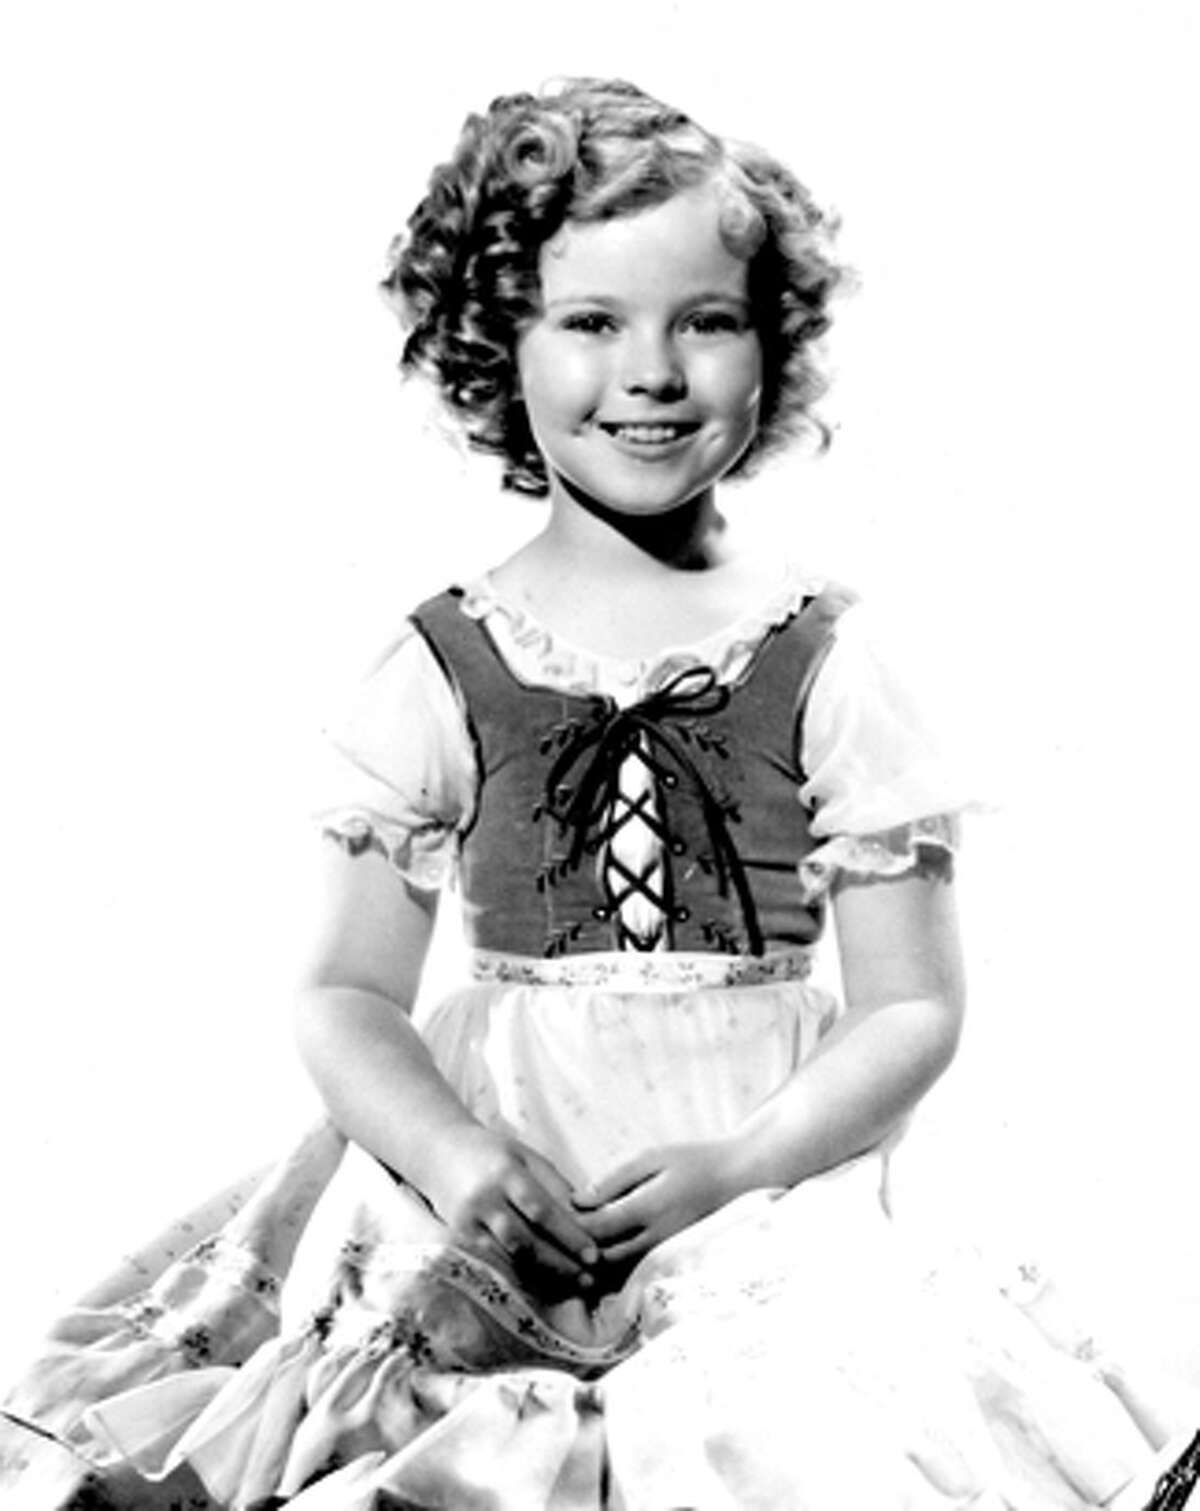 shirley temple in an undated publicity photo (perhaps around the release of heidi?). File photo.